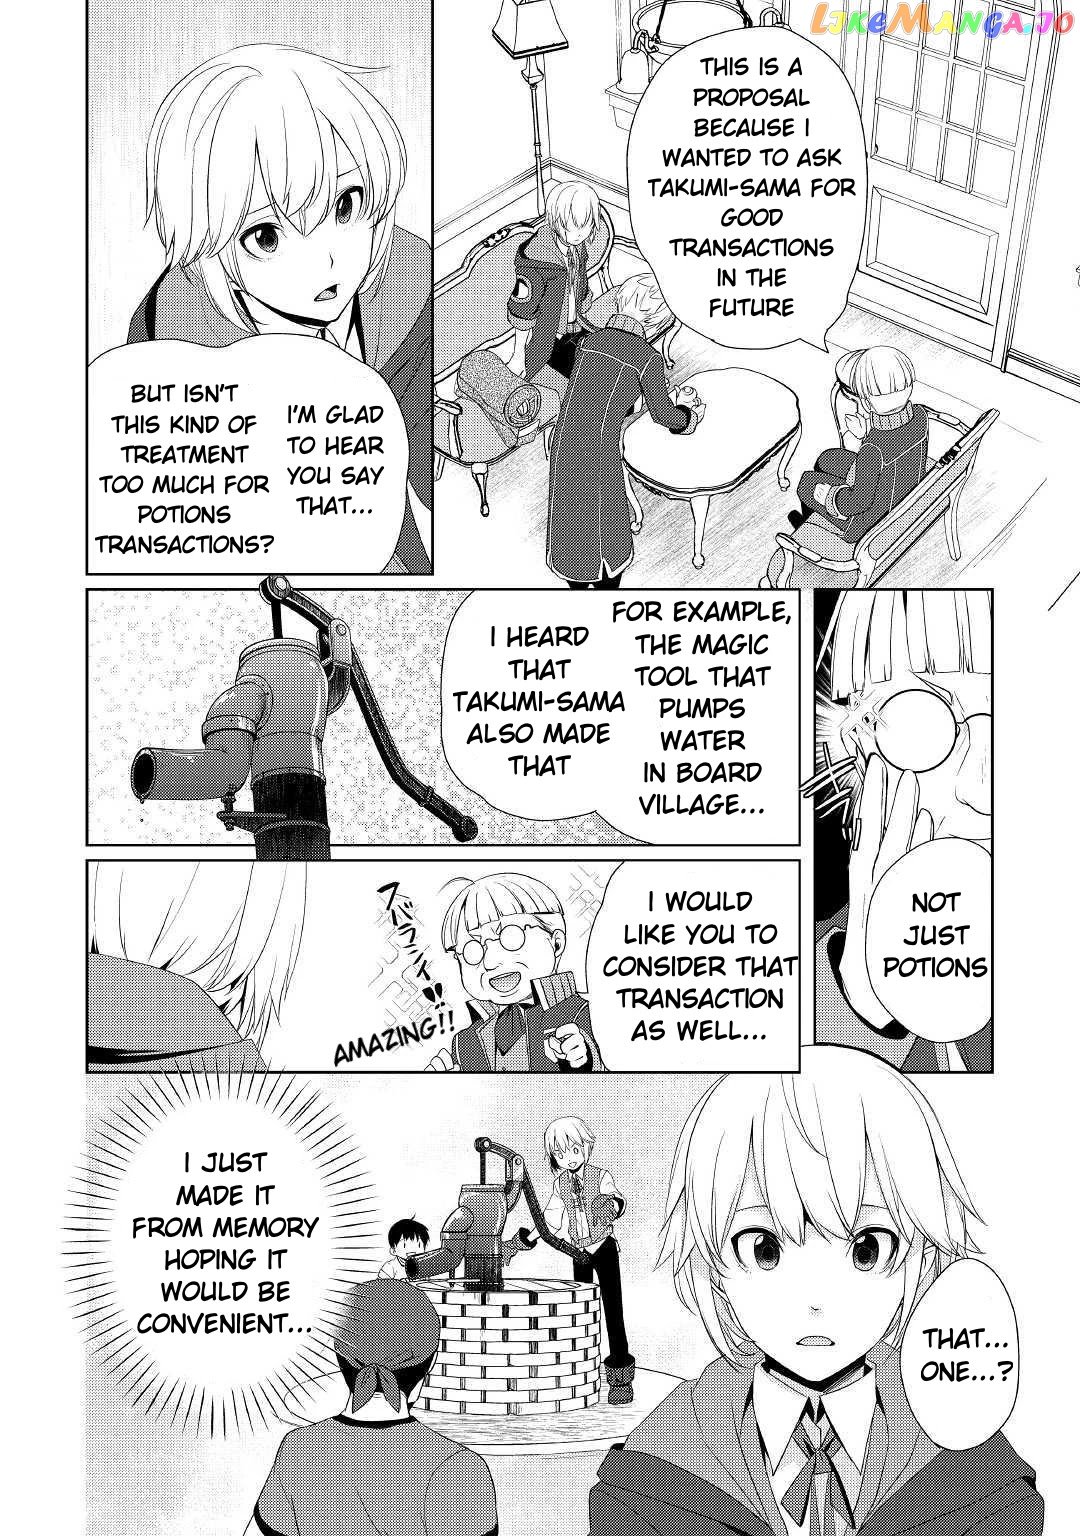 Someday Will I Be The Greatest Alchemist? chapter 7 - page 4